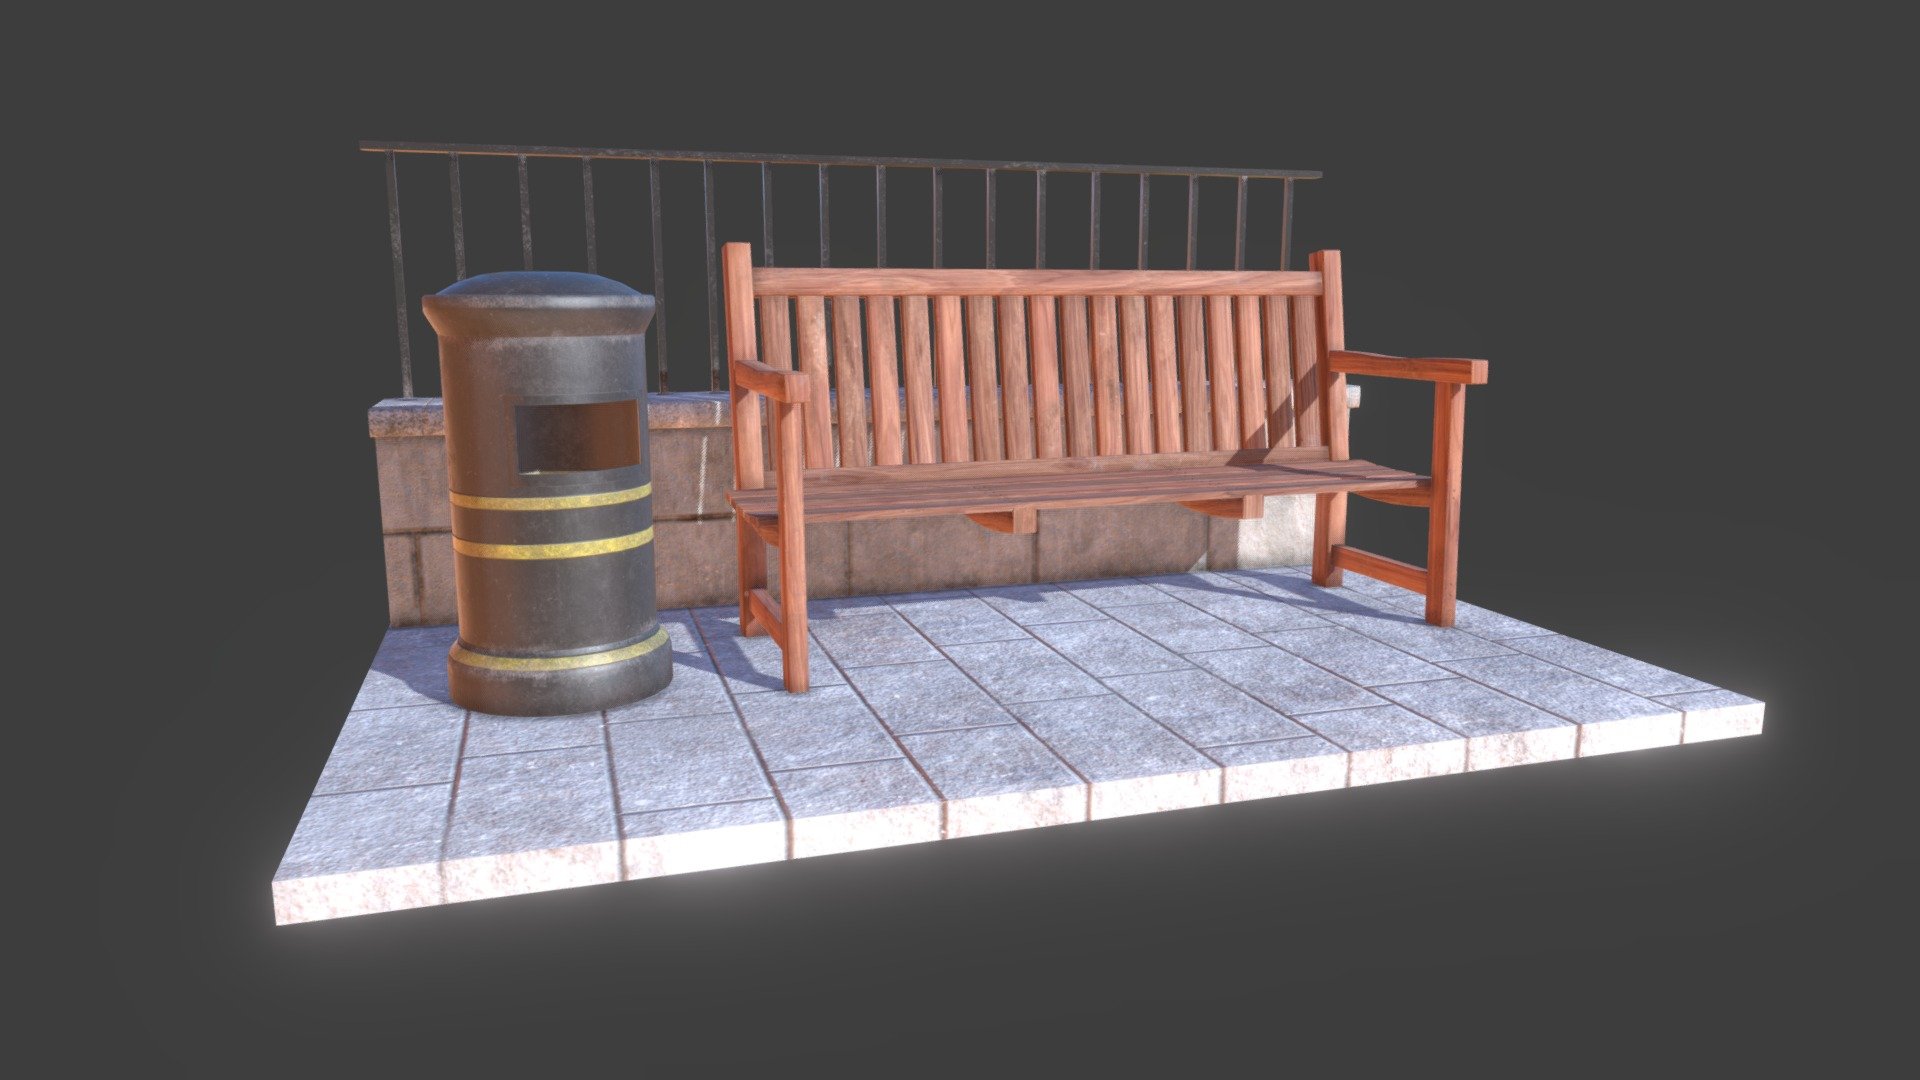 This asset consist of a wooden bench, a dustbin and a concrete plus metal fence 3d model